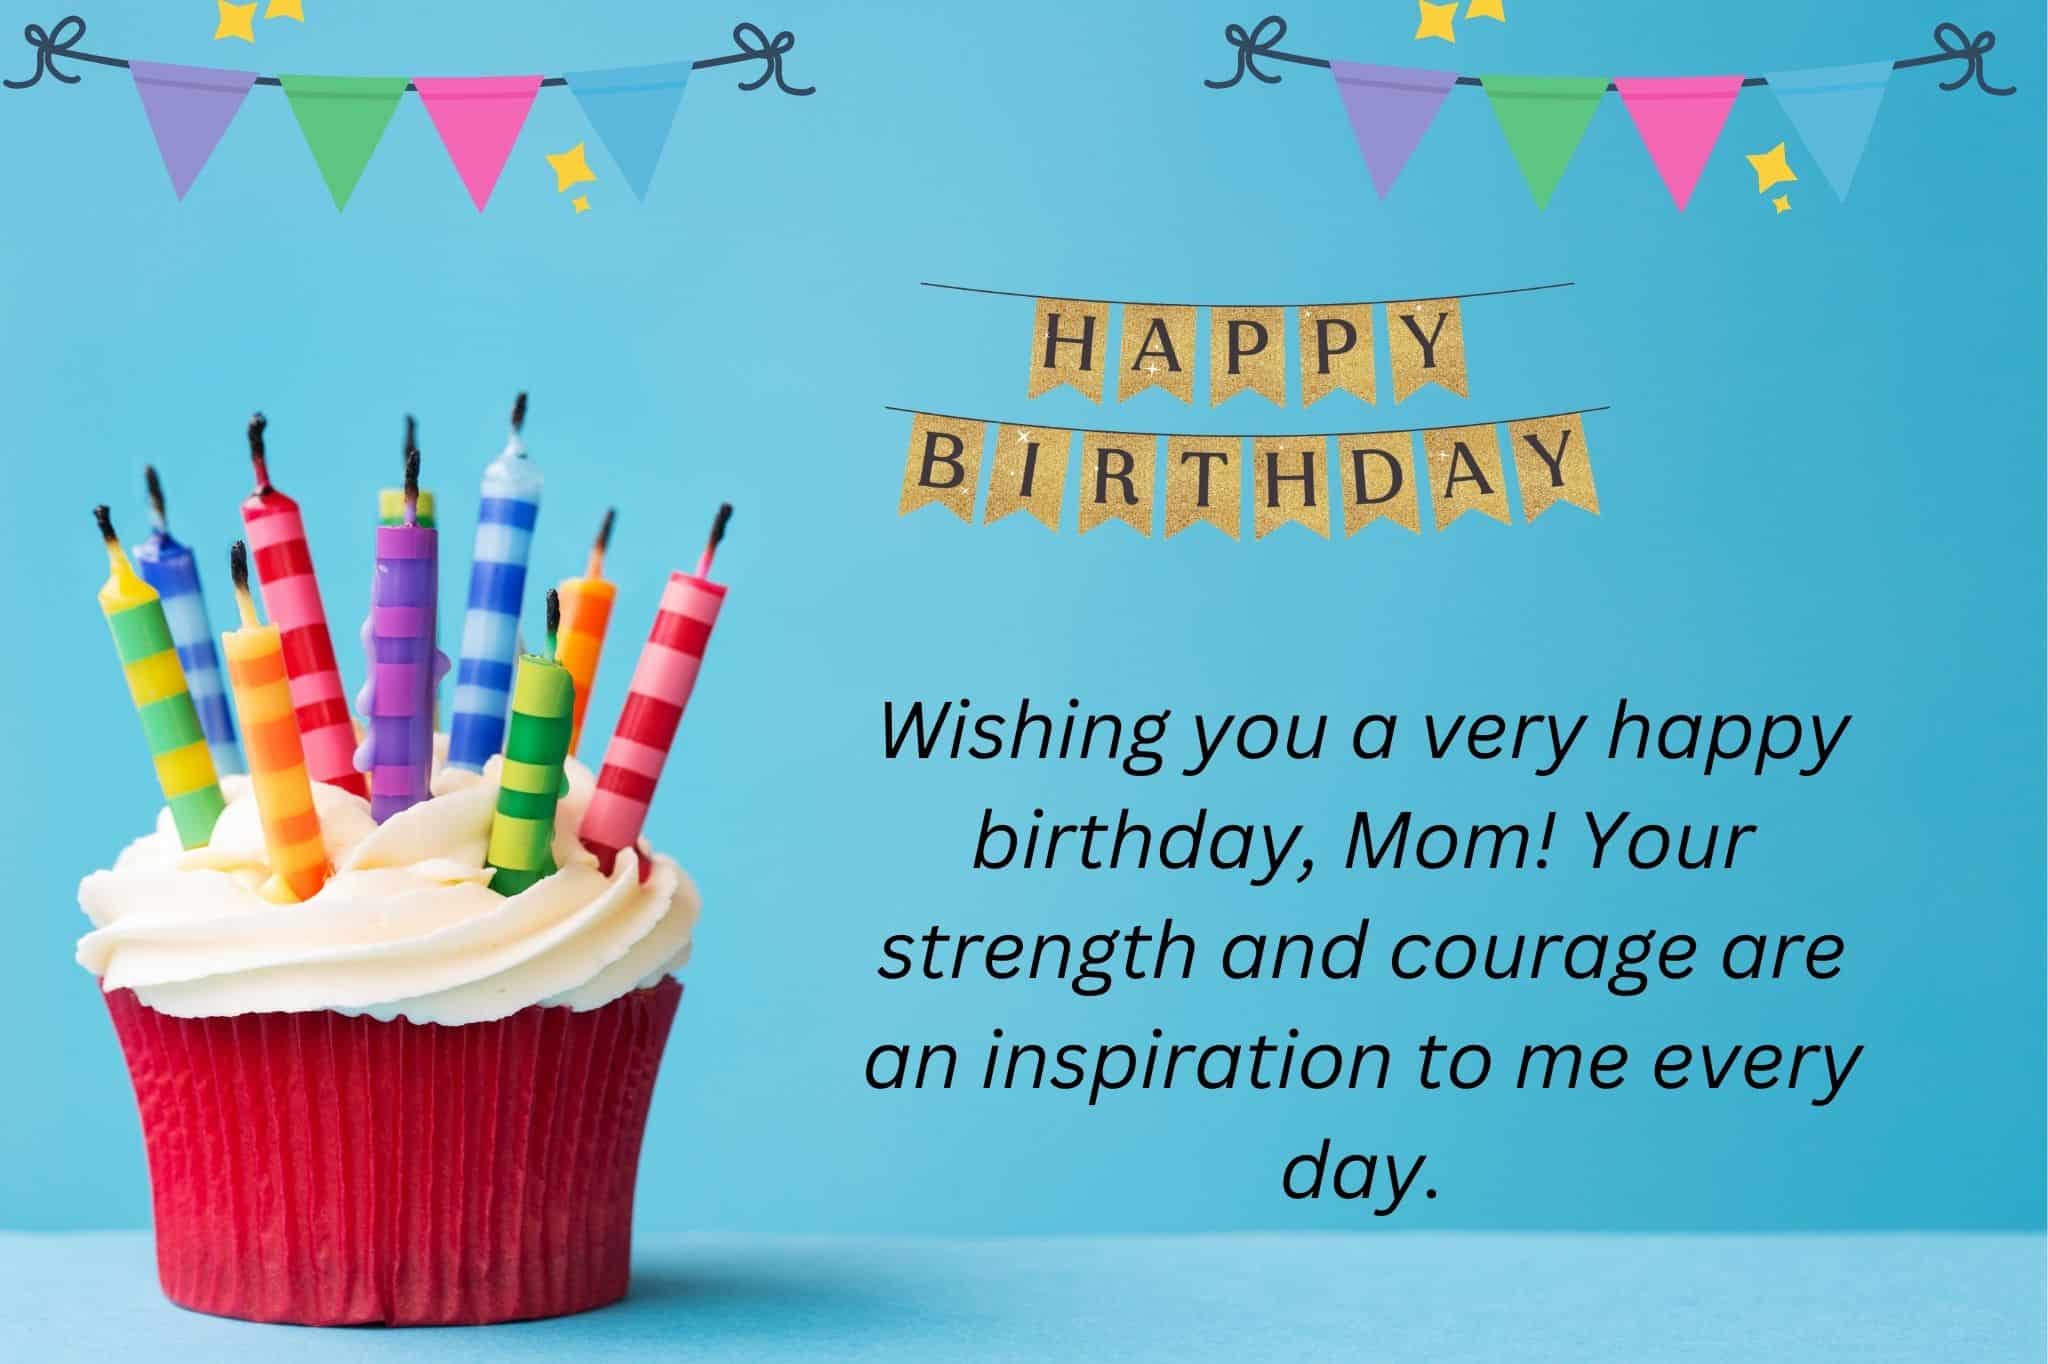 wishing you a very happy birthday, mom! your strength and courage are an inspiration to me every day.